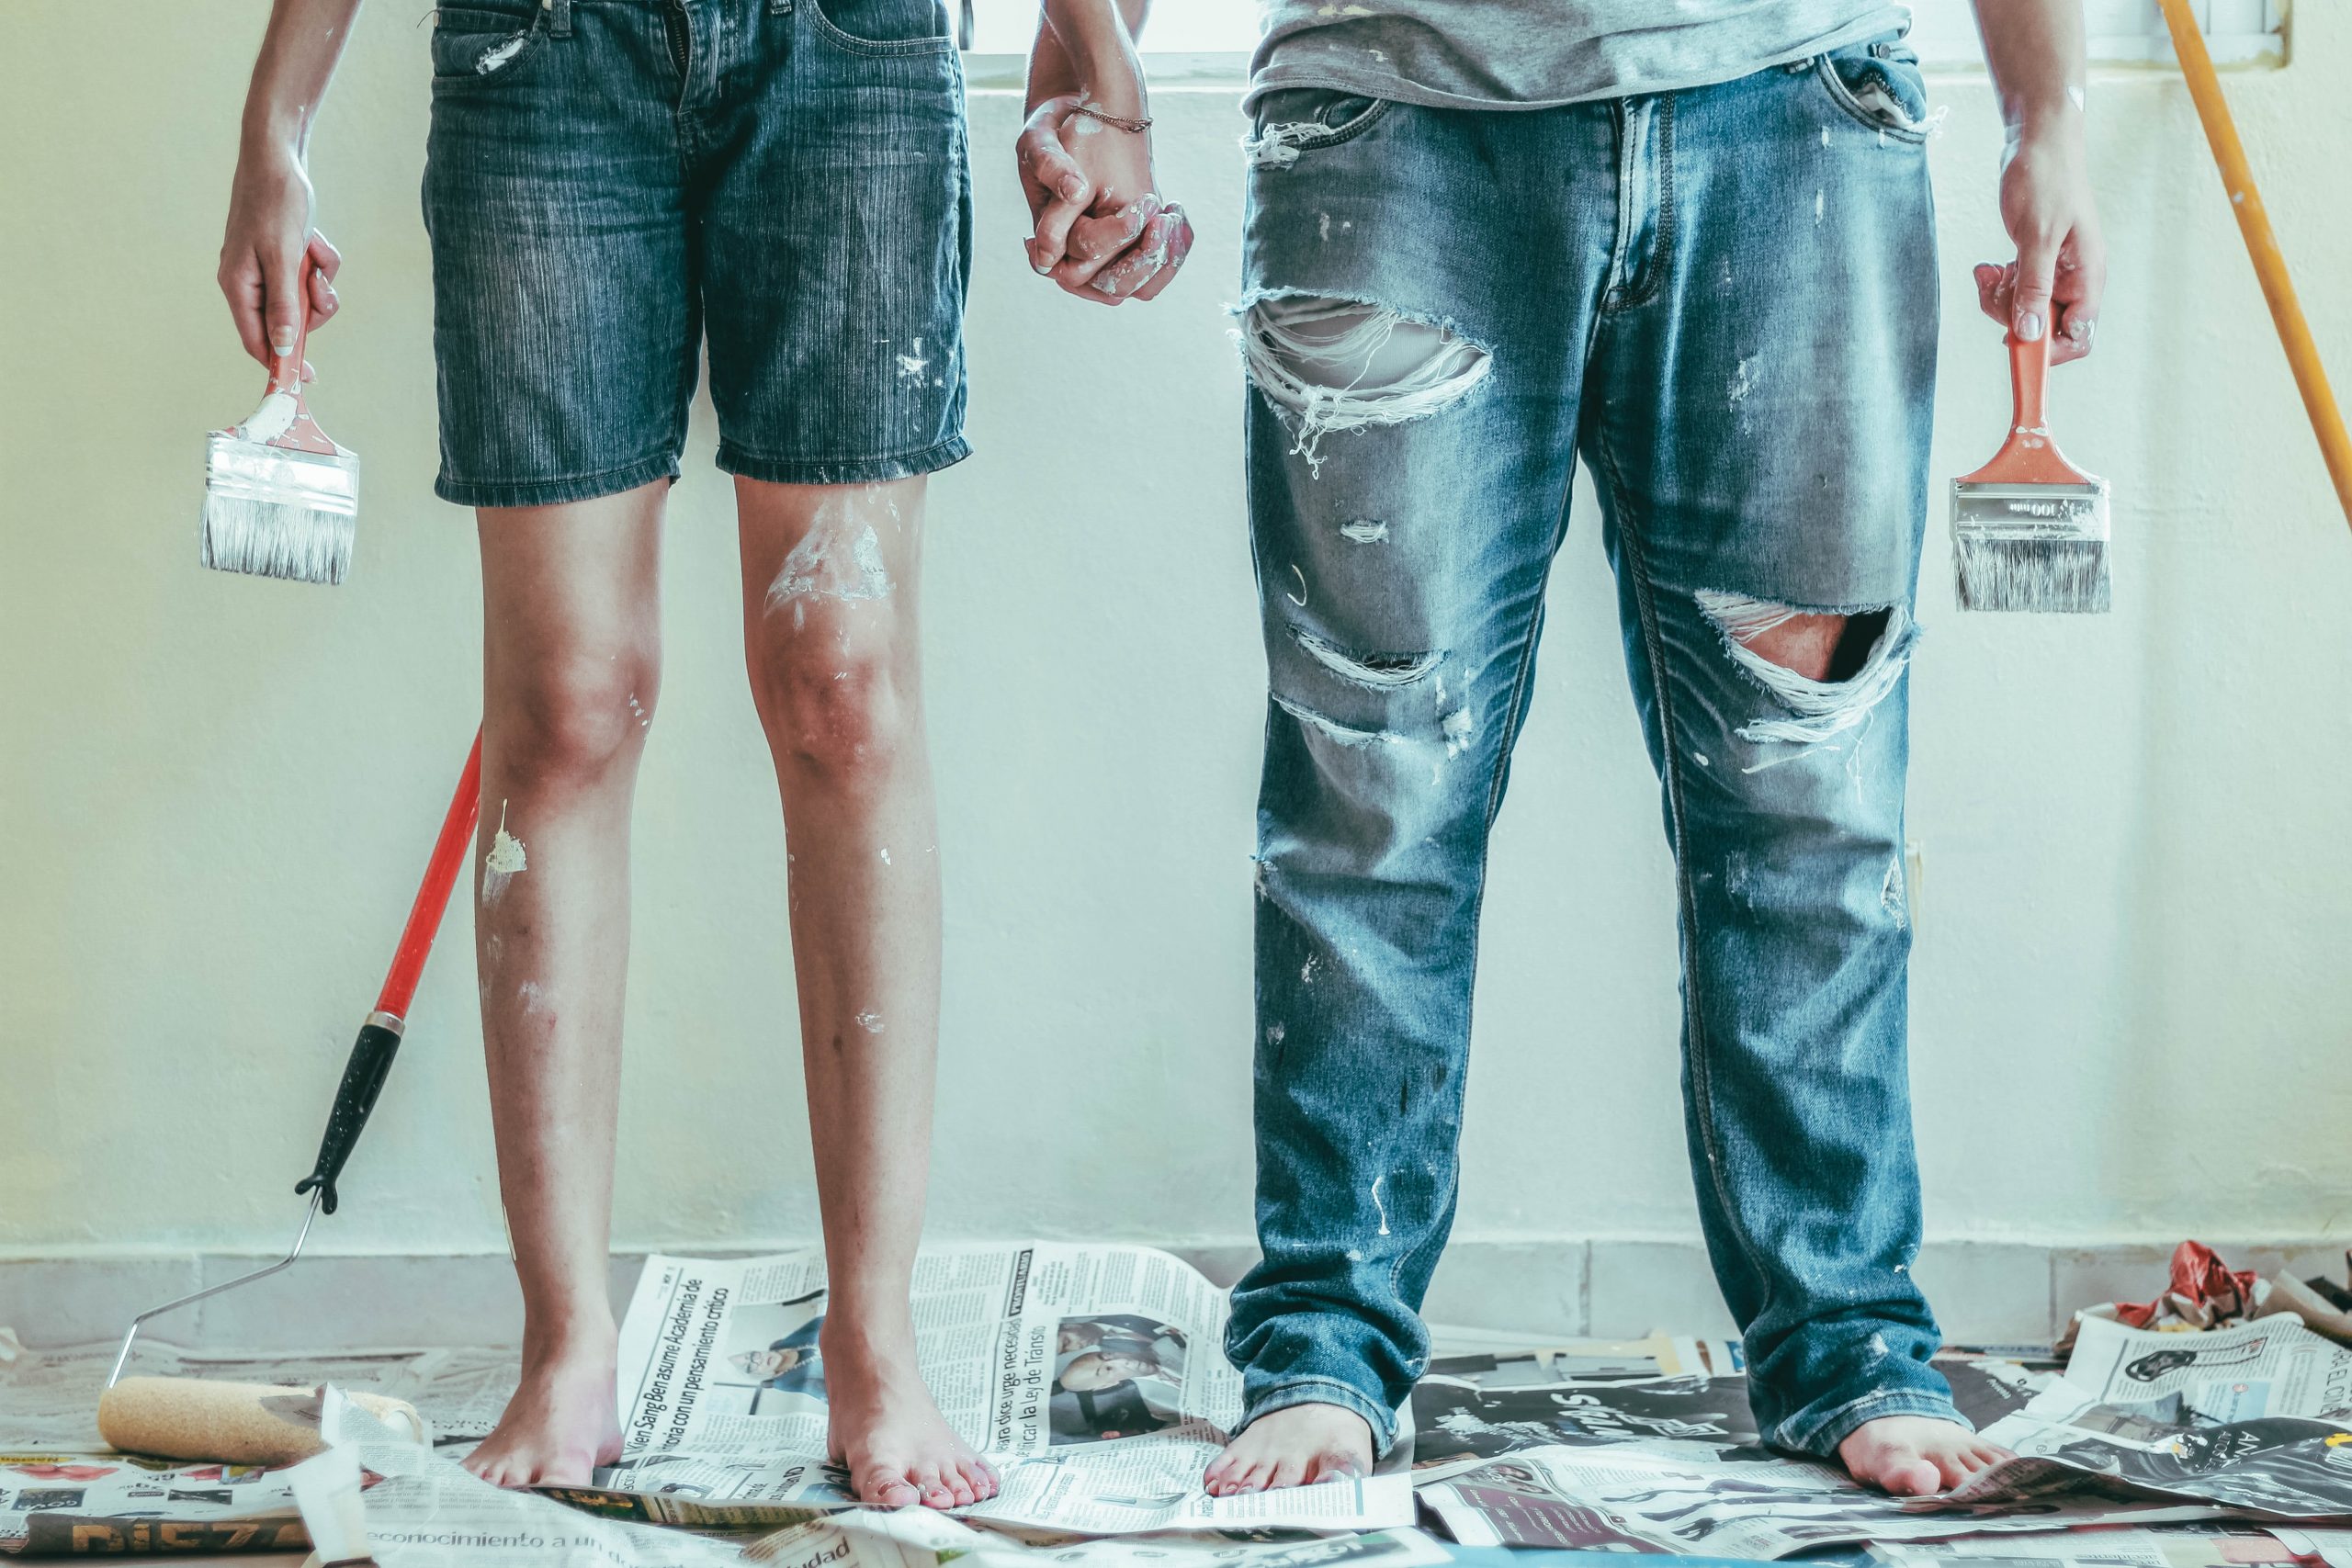 woman and a man covered in paint holding painting implements